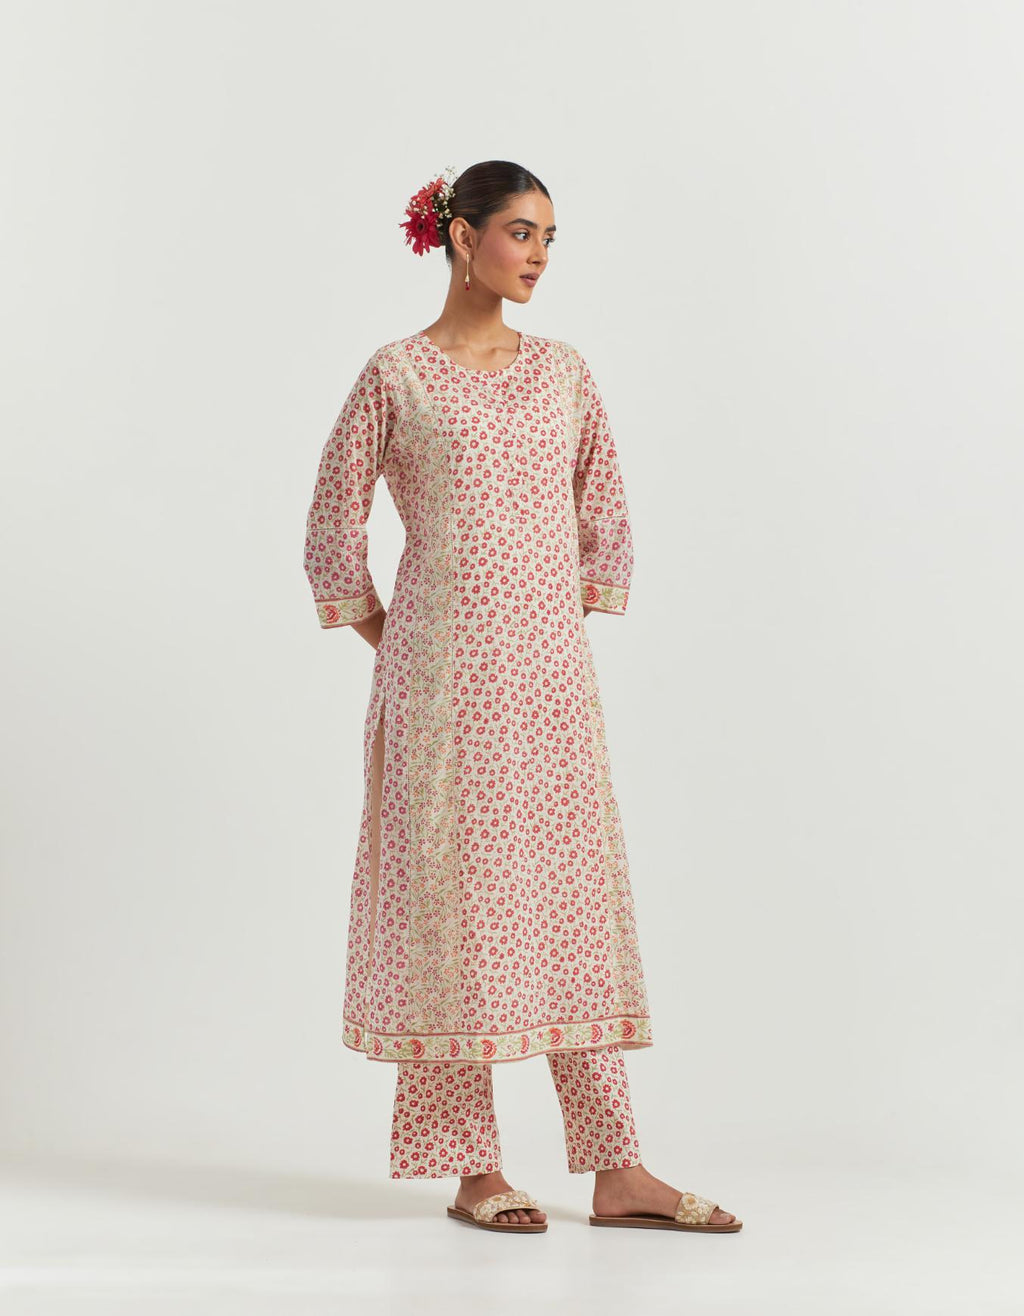 Multi colored cotton hand-block printed kurta set with multi-print panels, highlighted with off white ladder lace detailing at side panels.